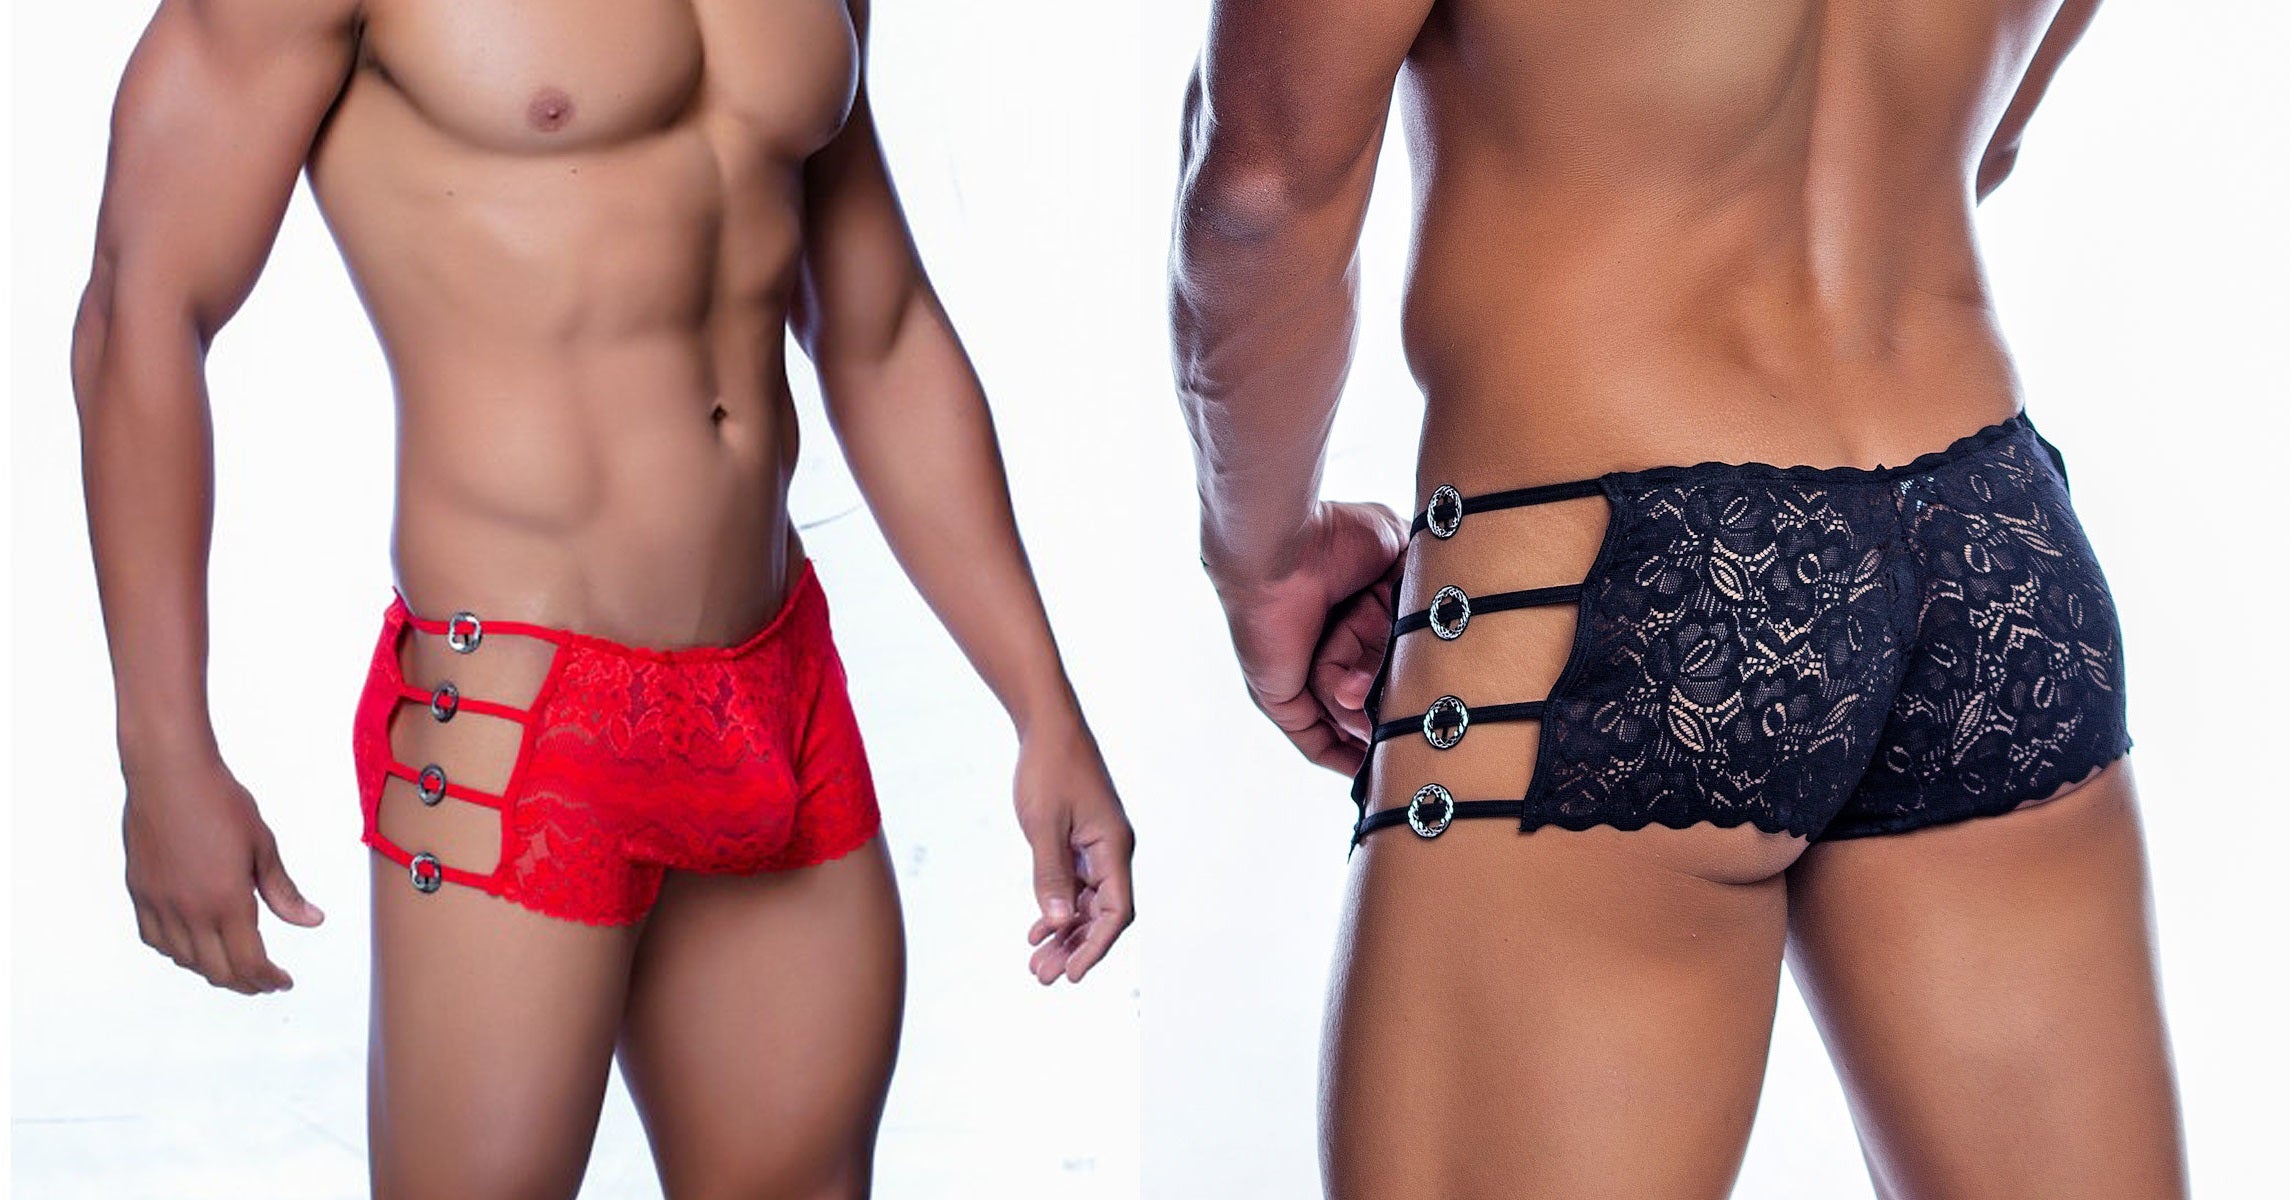 Male Basics Embroidered Boxer Briefs Shows Your Sexy Sides… Literally!